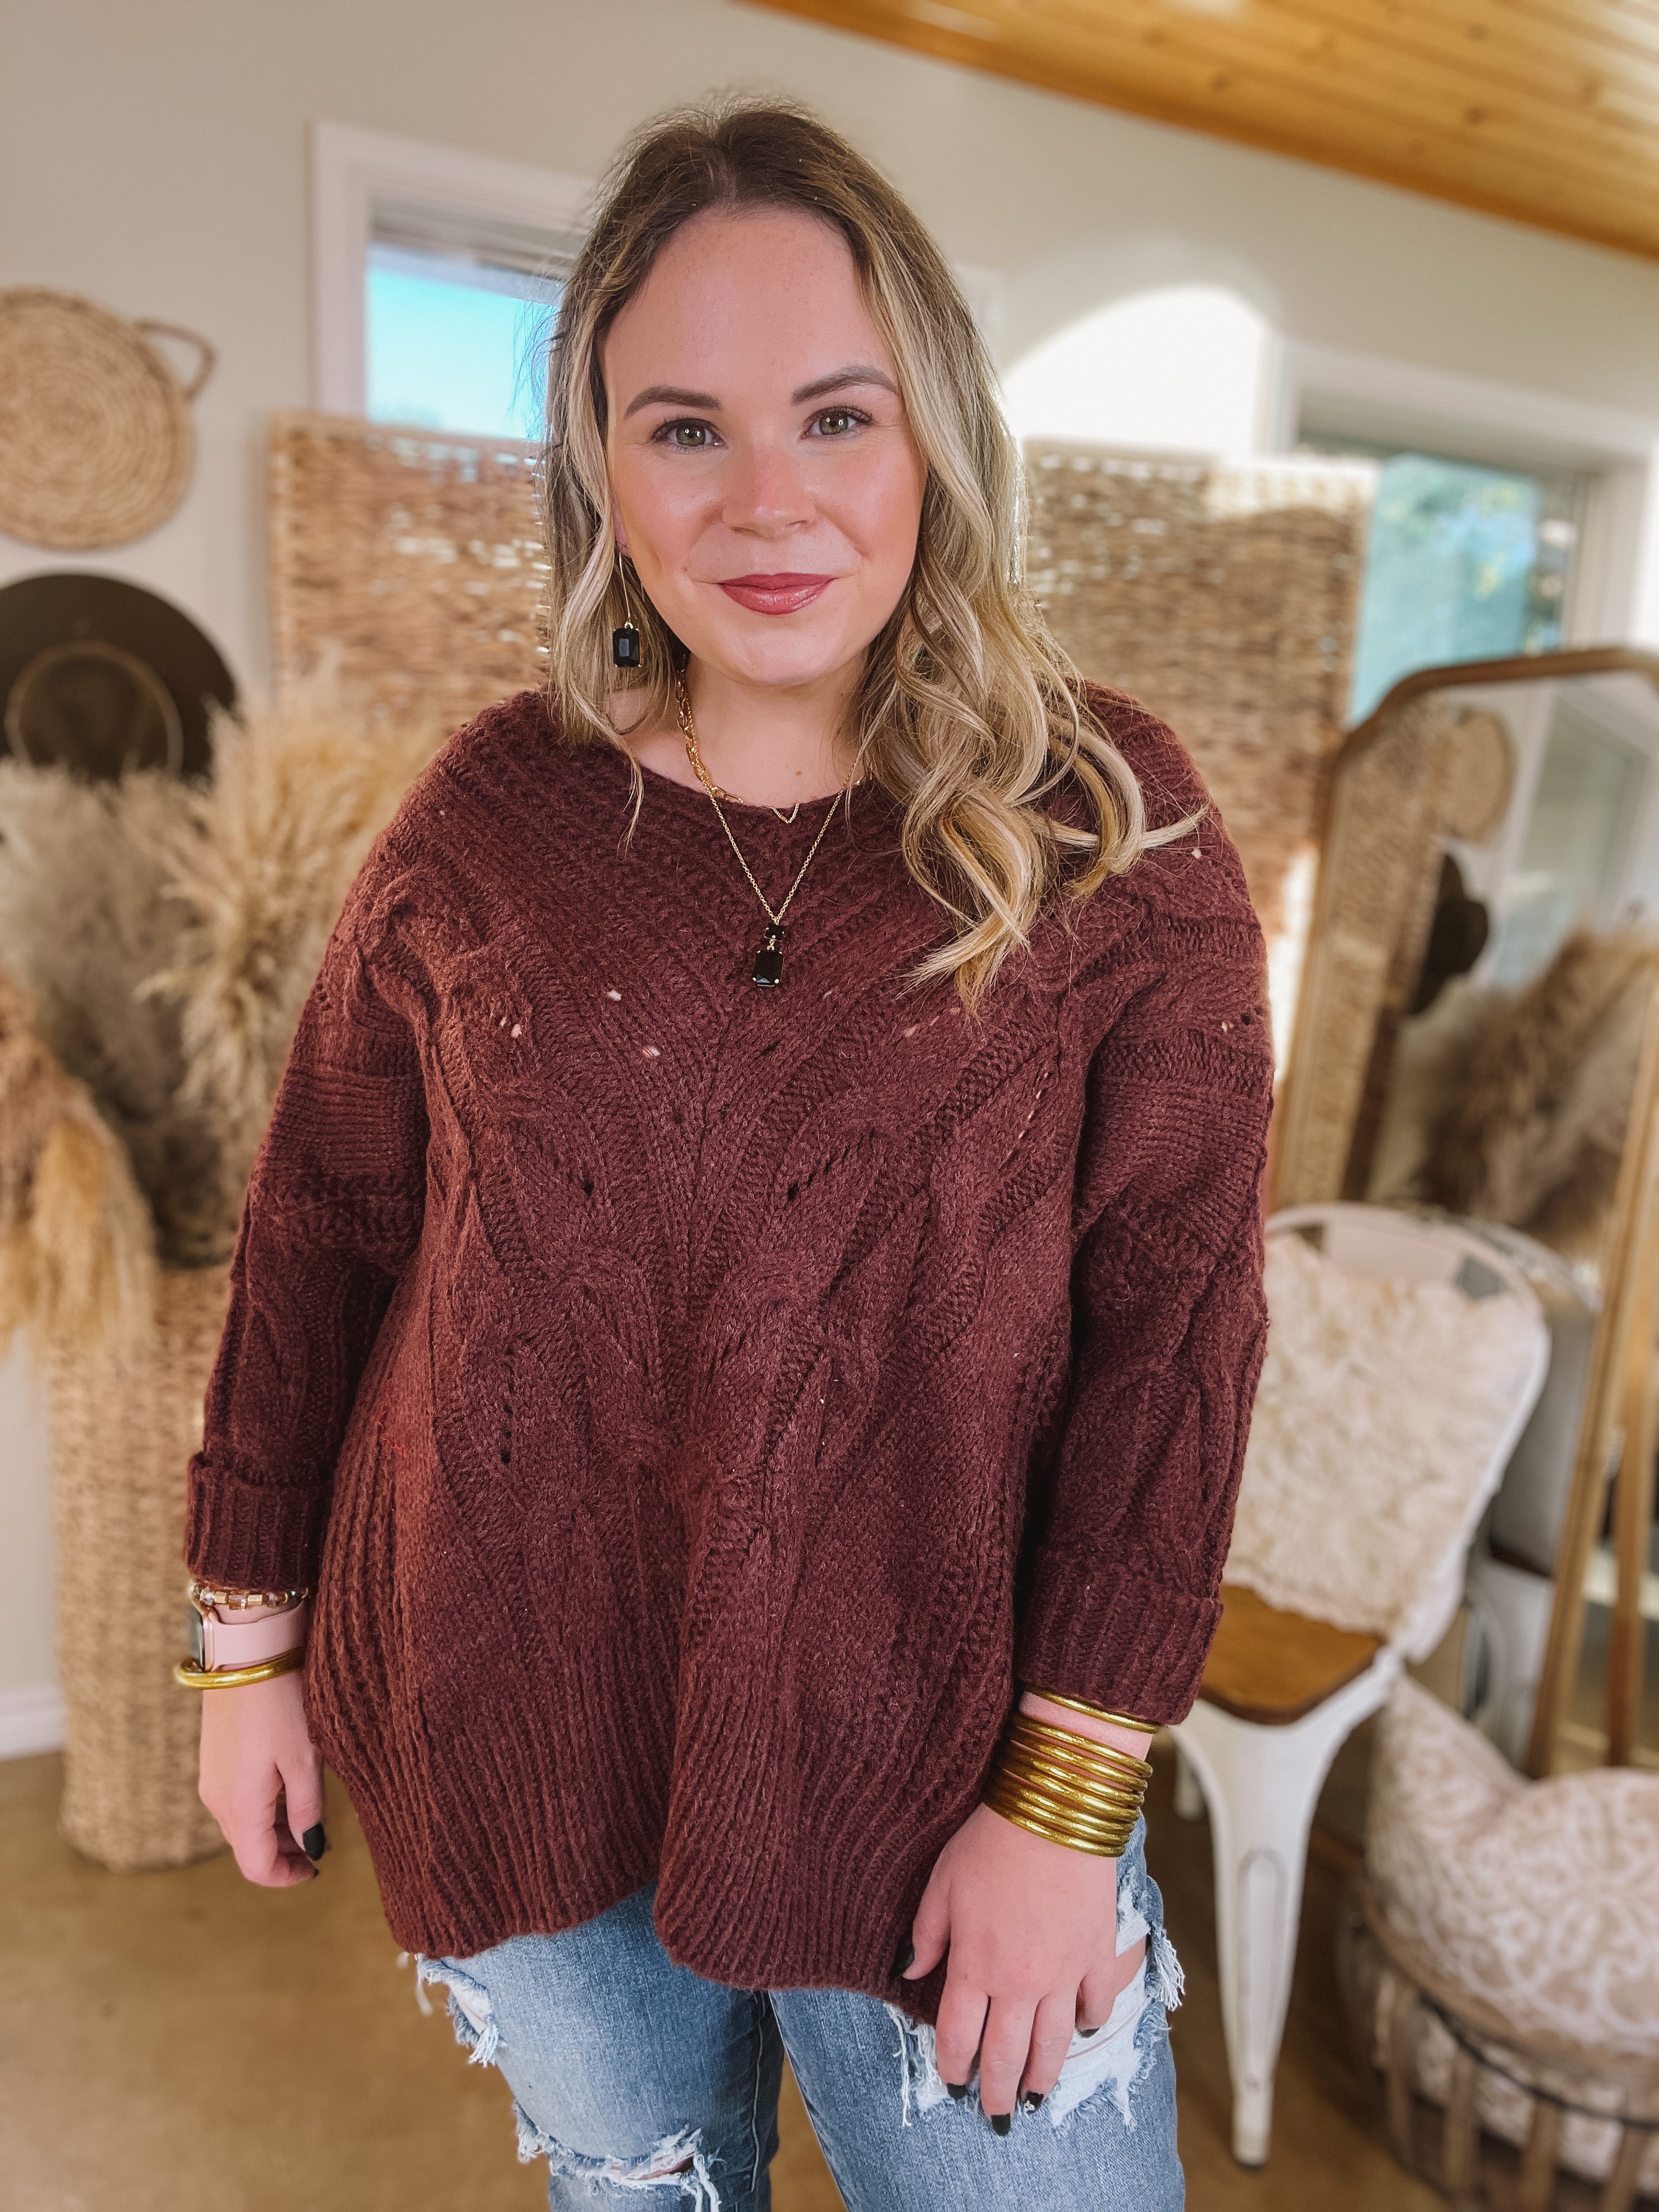 Crisp Morning Air Oversized Dolman 3/4 Sleeve Sweater in Maroon - Giddy Up Glamour Boutique